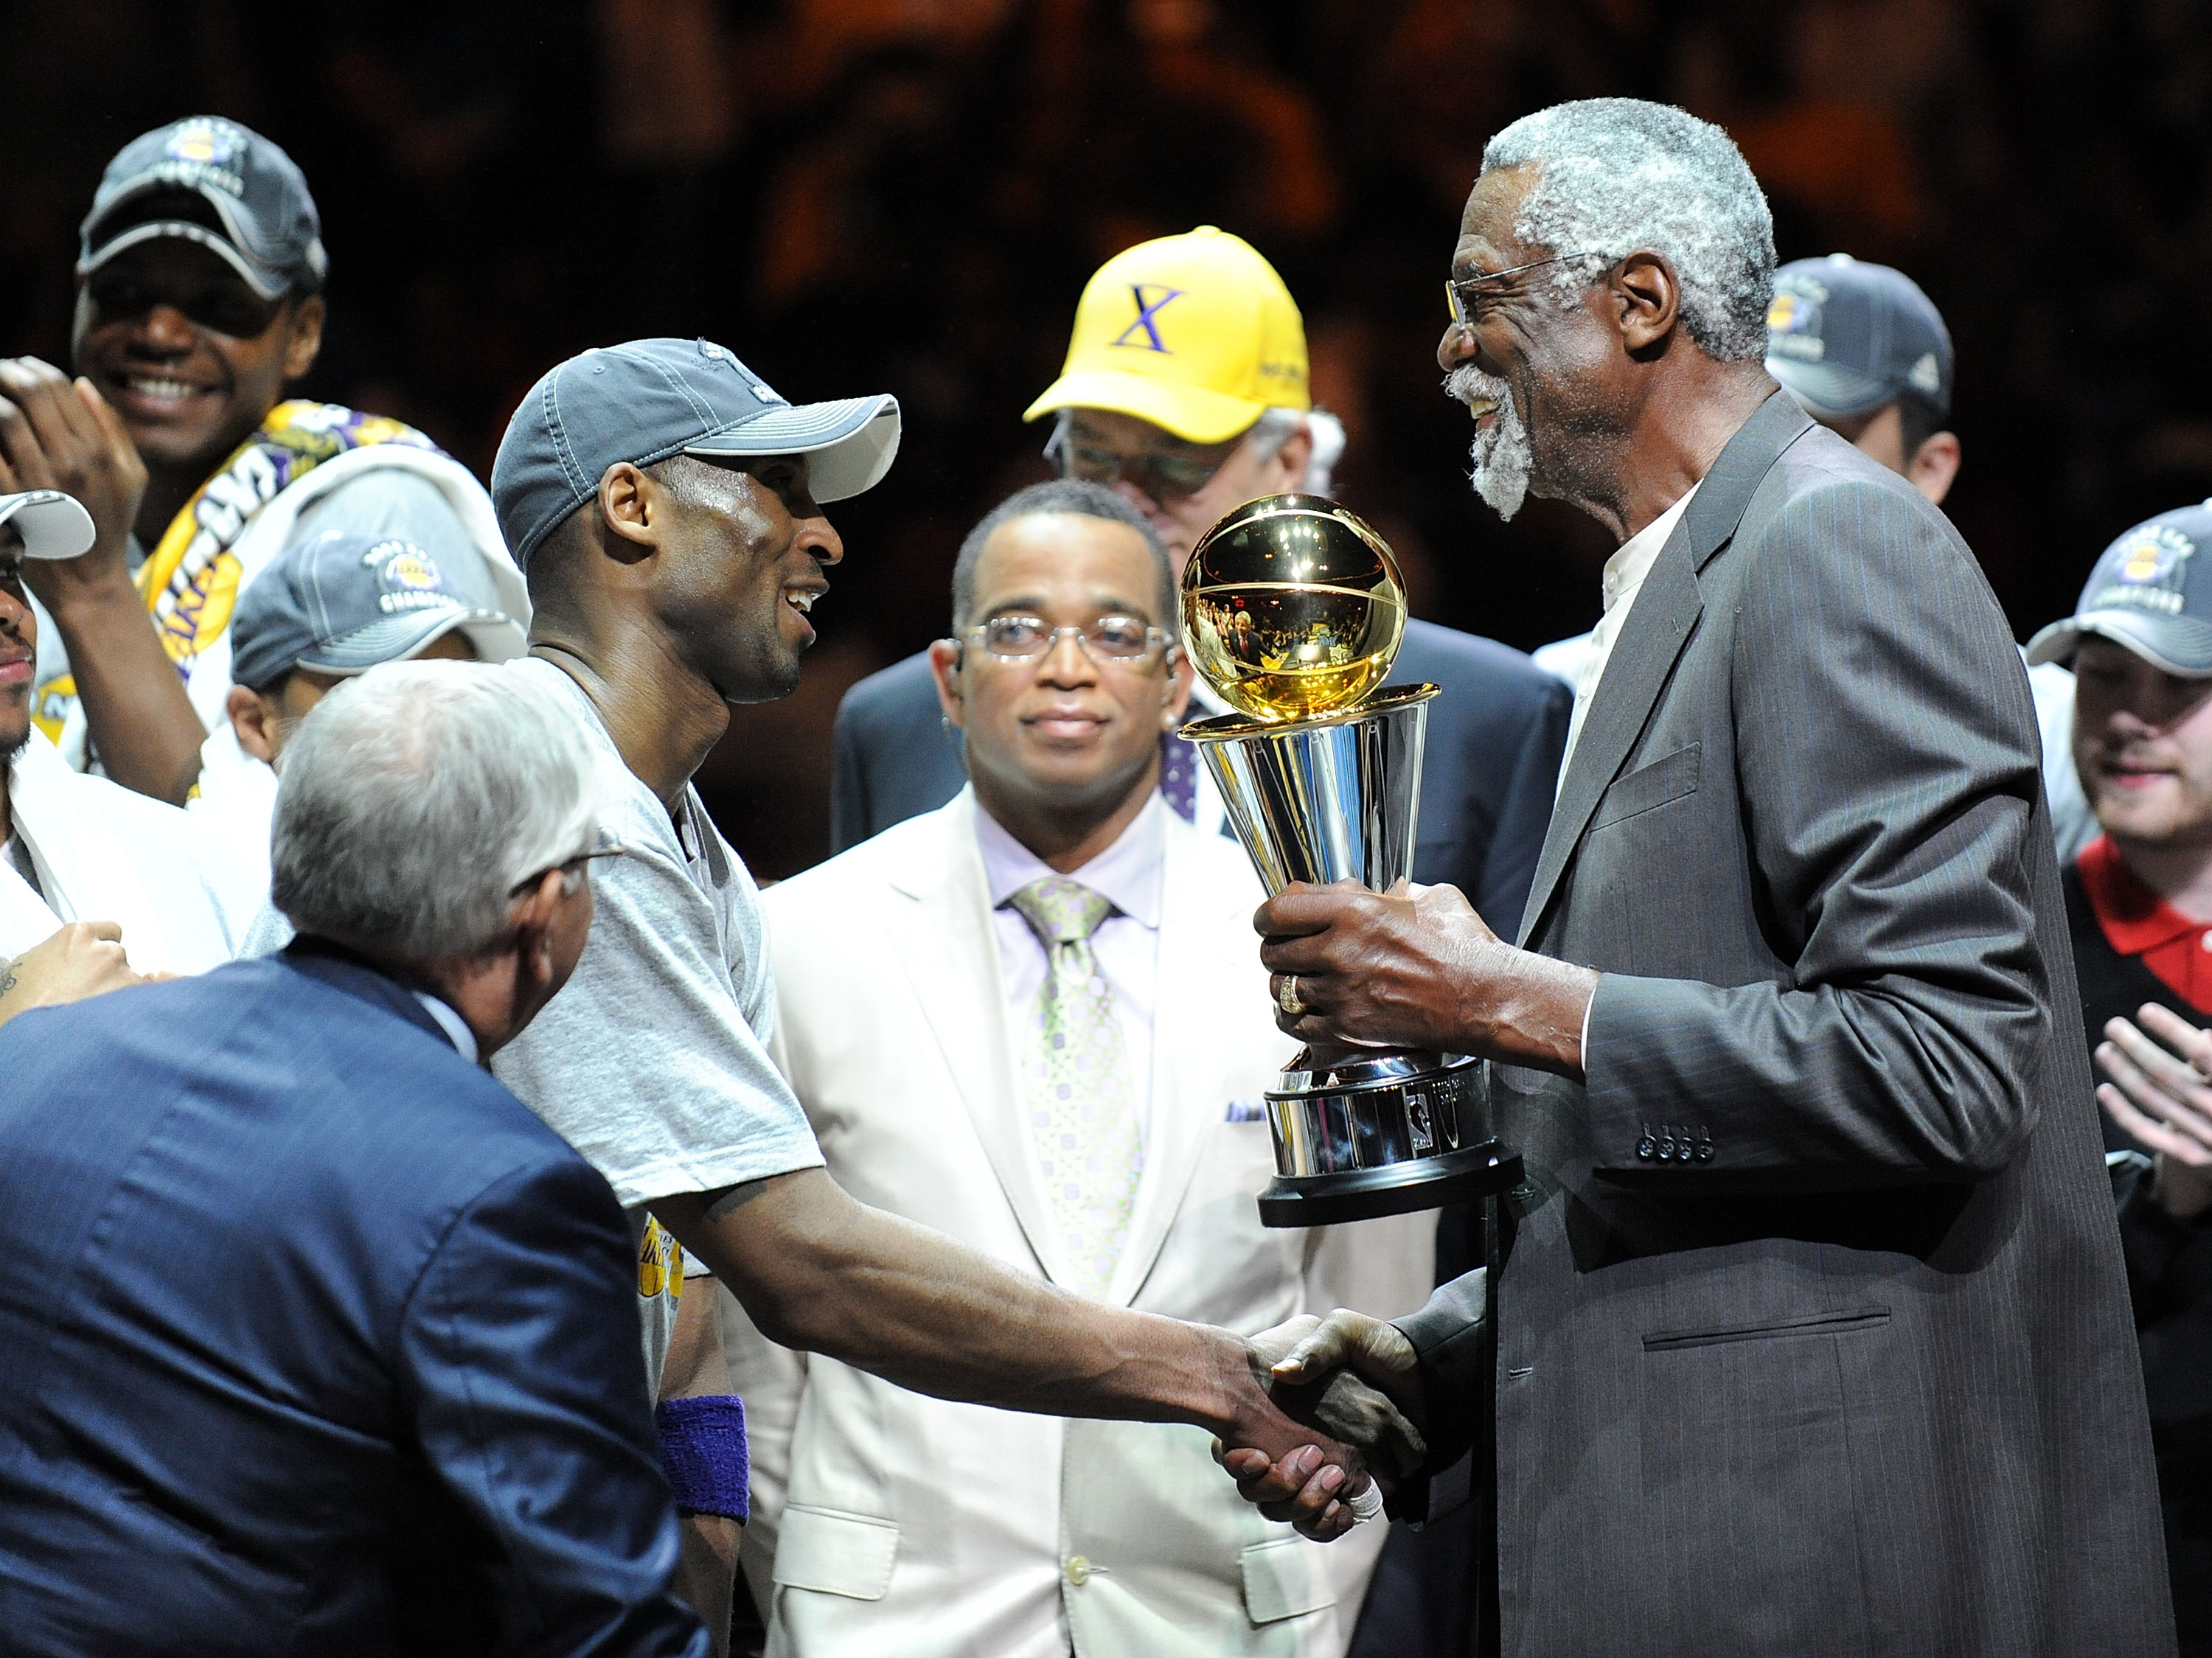 ORLANDO, FL - JUNE 14:  Kobe Bryant #24 of the Los Angeles Lakers receives the Bill Russell MVP trophy from Bill Russell after the Lakers defeated the Orlando Magic 99-86 in Game Five of the 2009 NBA Finals on June 14, 2009 at Amway Arena in Orlando, Flor